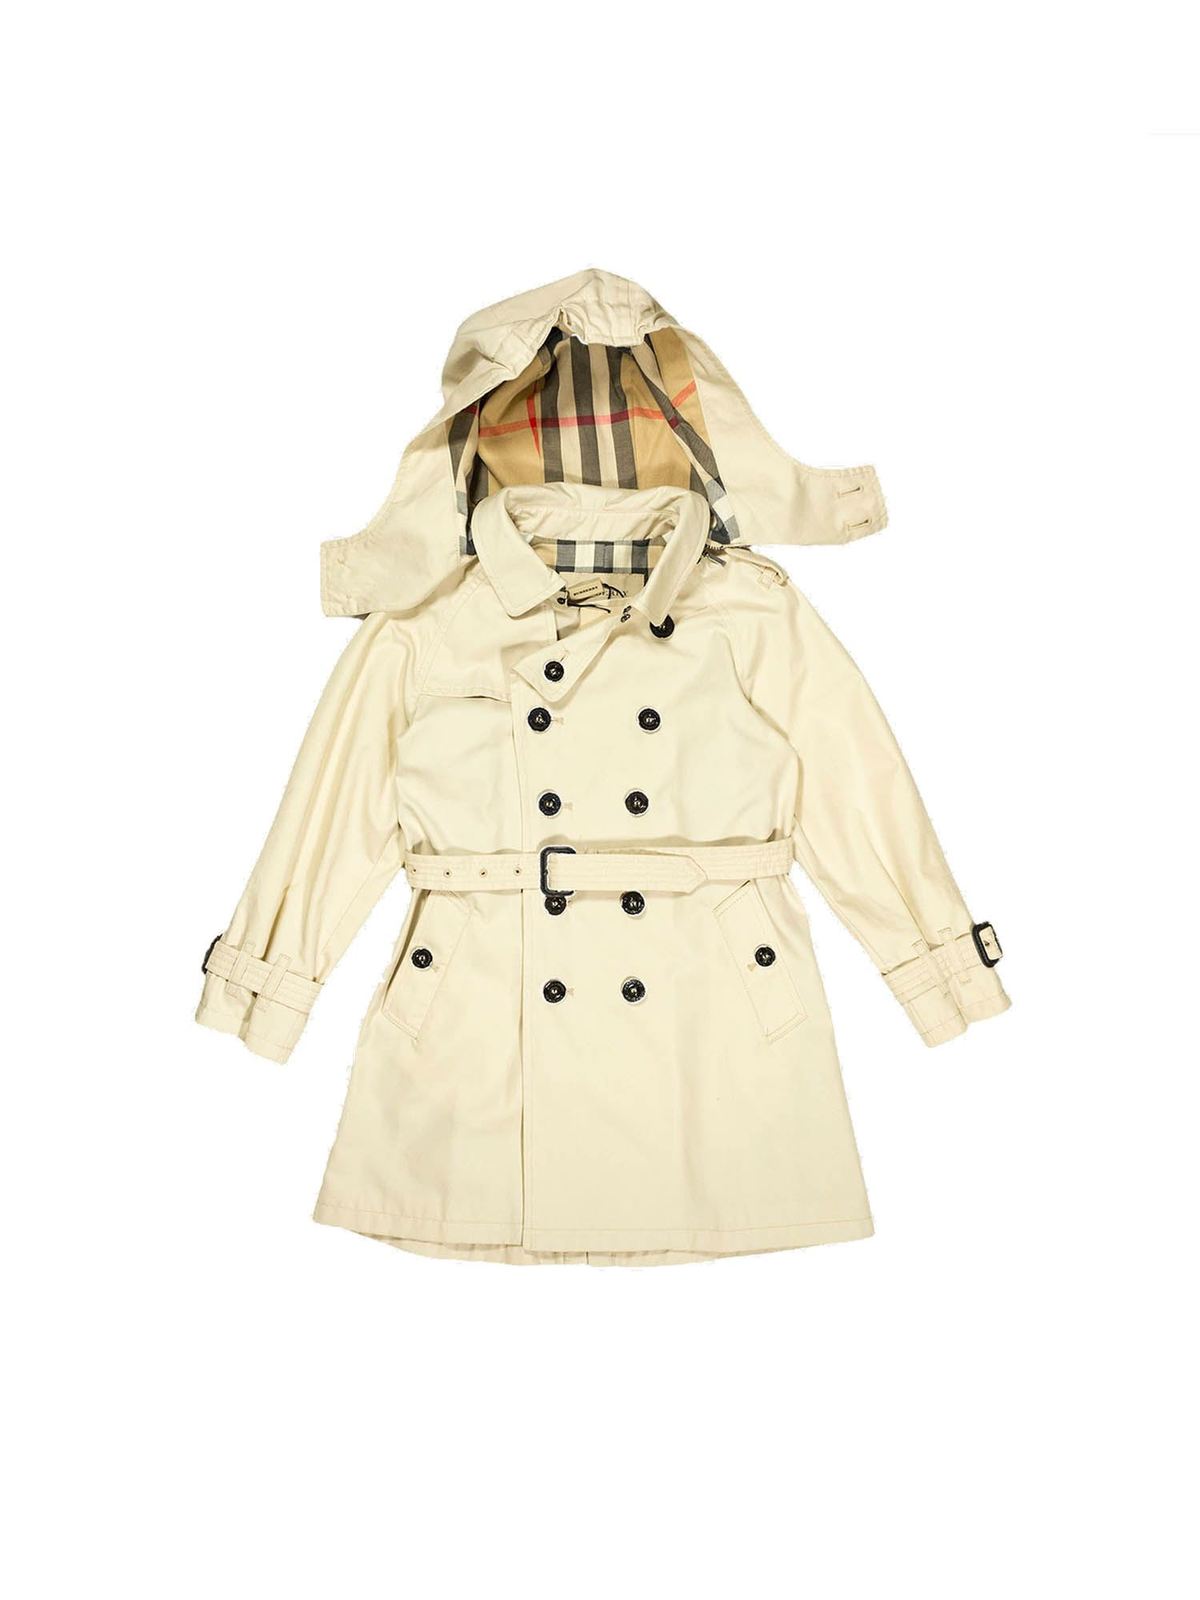 BURBERRY DOUBLE-BREASTED TRENCH COAT IN BEIGE